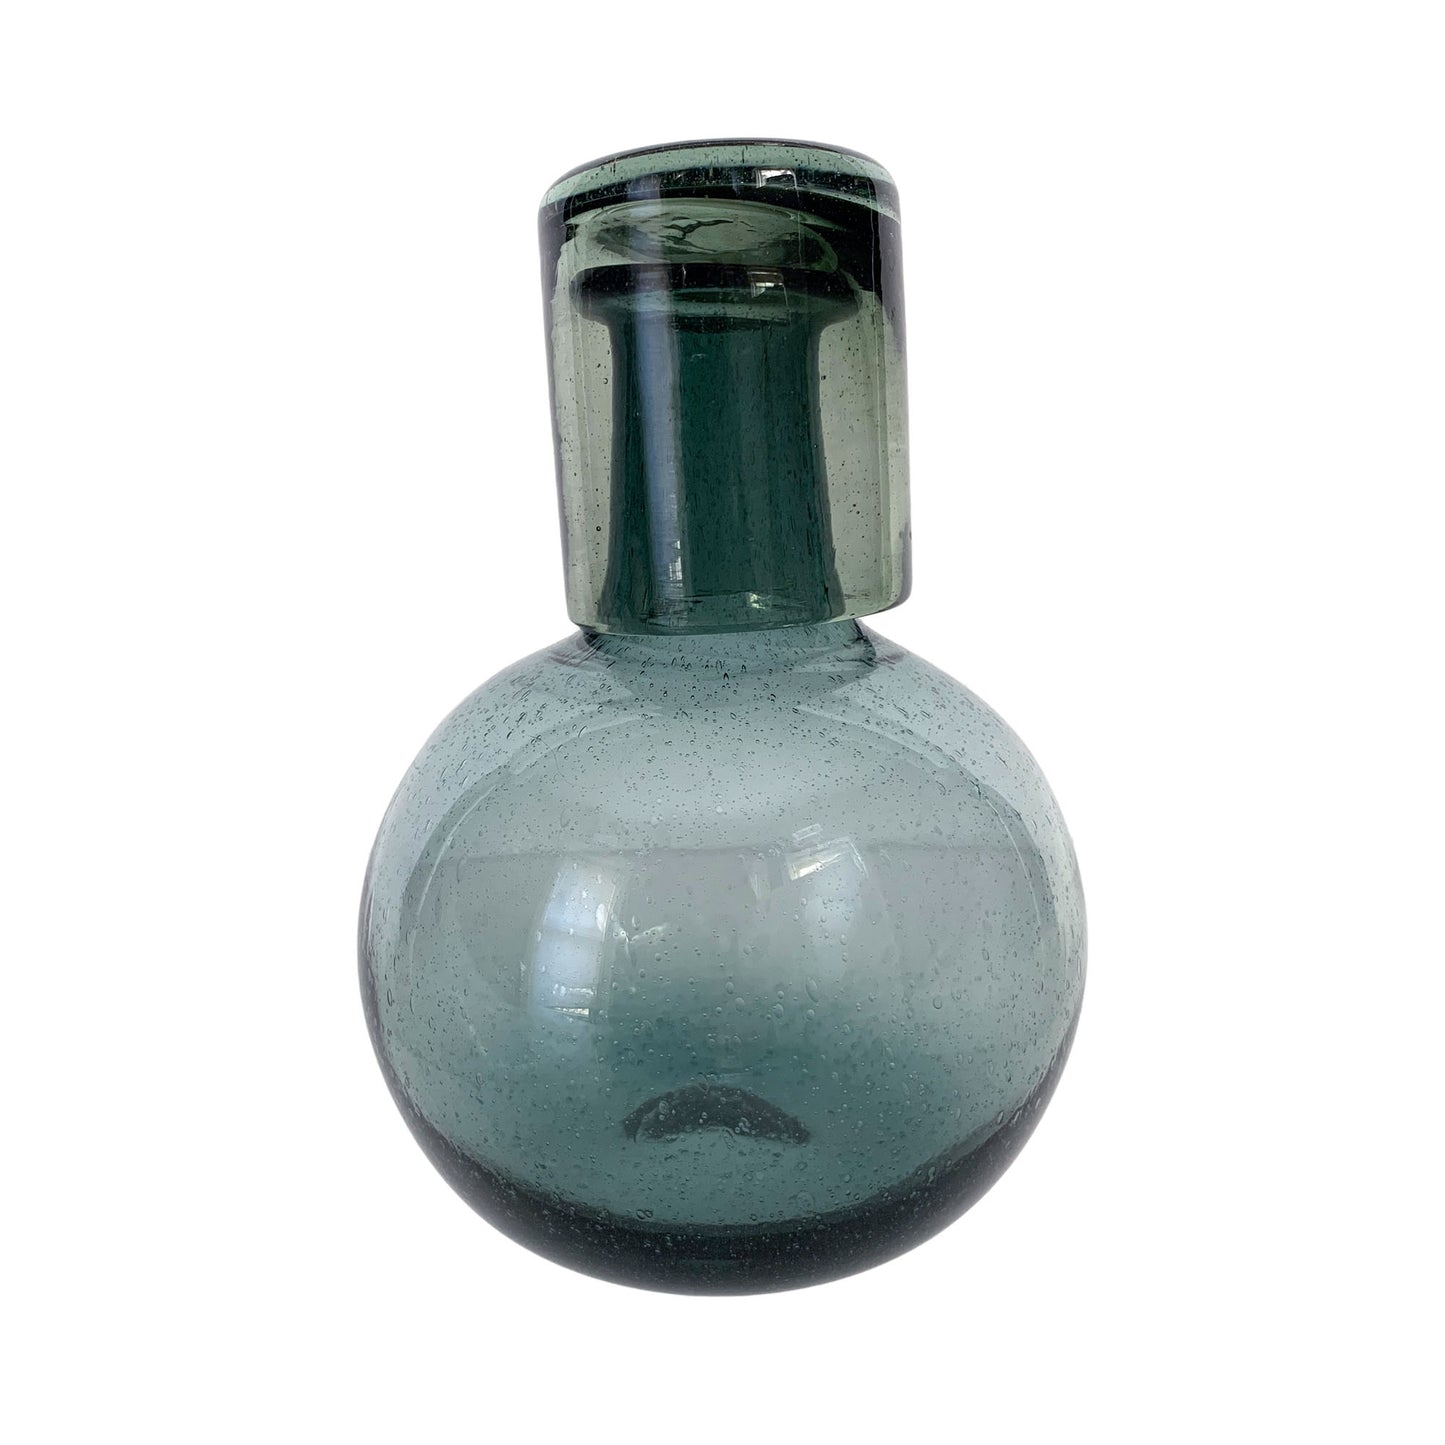 Hand Blown Round Bedside Water Carafe- Made in Mexico - Holds 750ml (25oz)